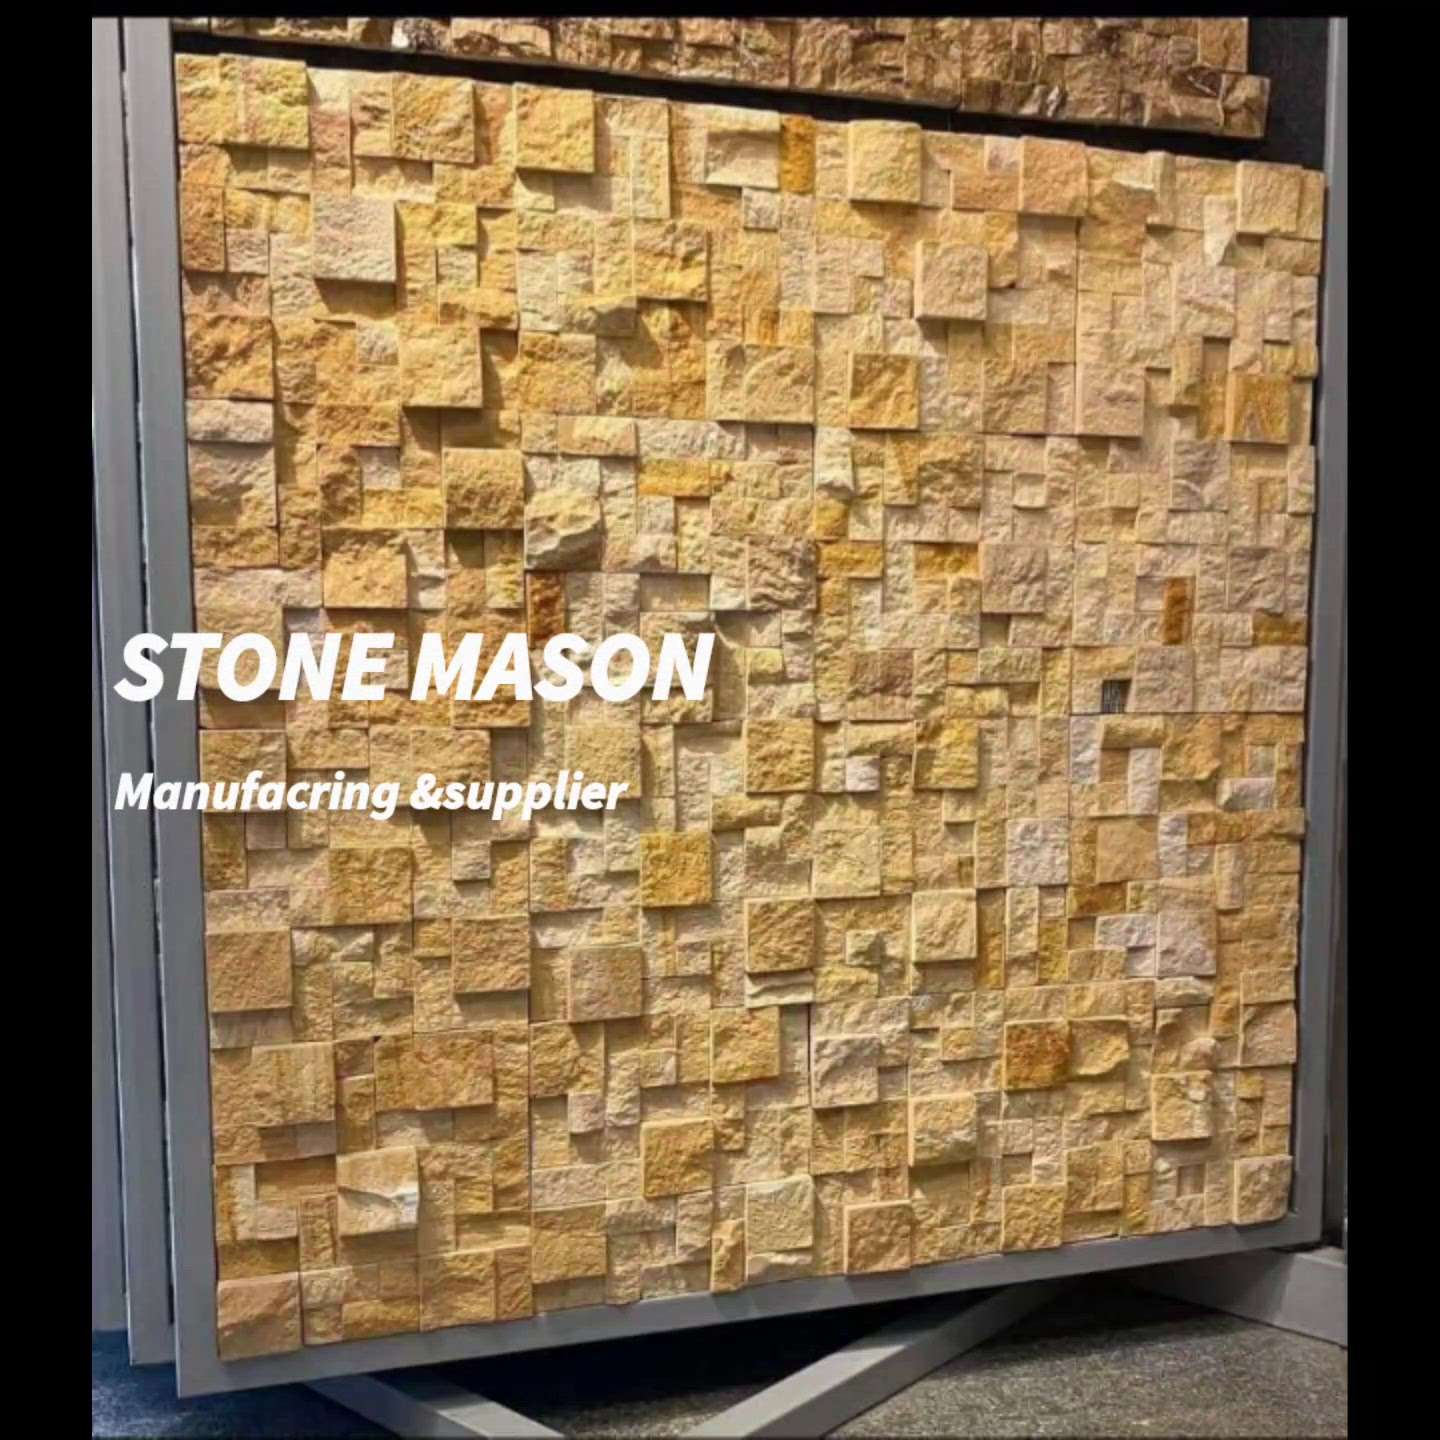 We are manufacturer and supplirs for natural Stone wall cladding #exterior #interior #cladding #wall #home #elevation #stone #natural